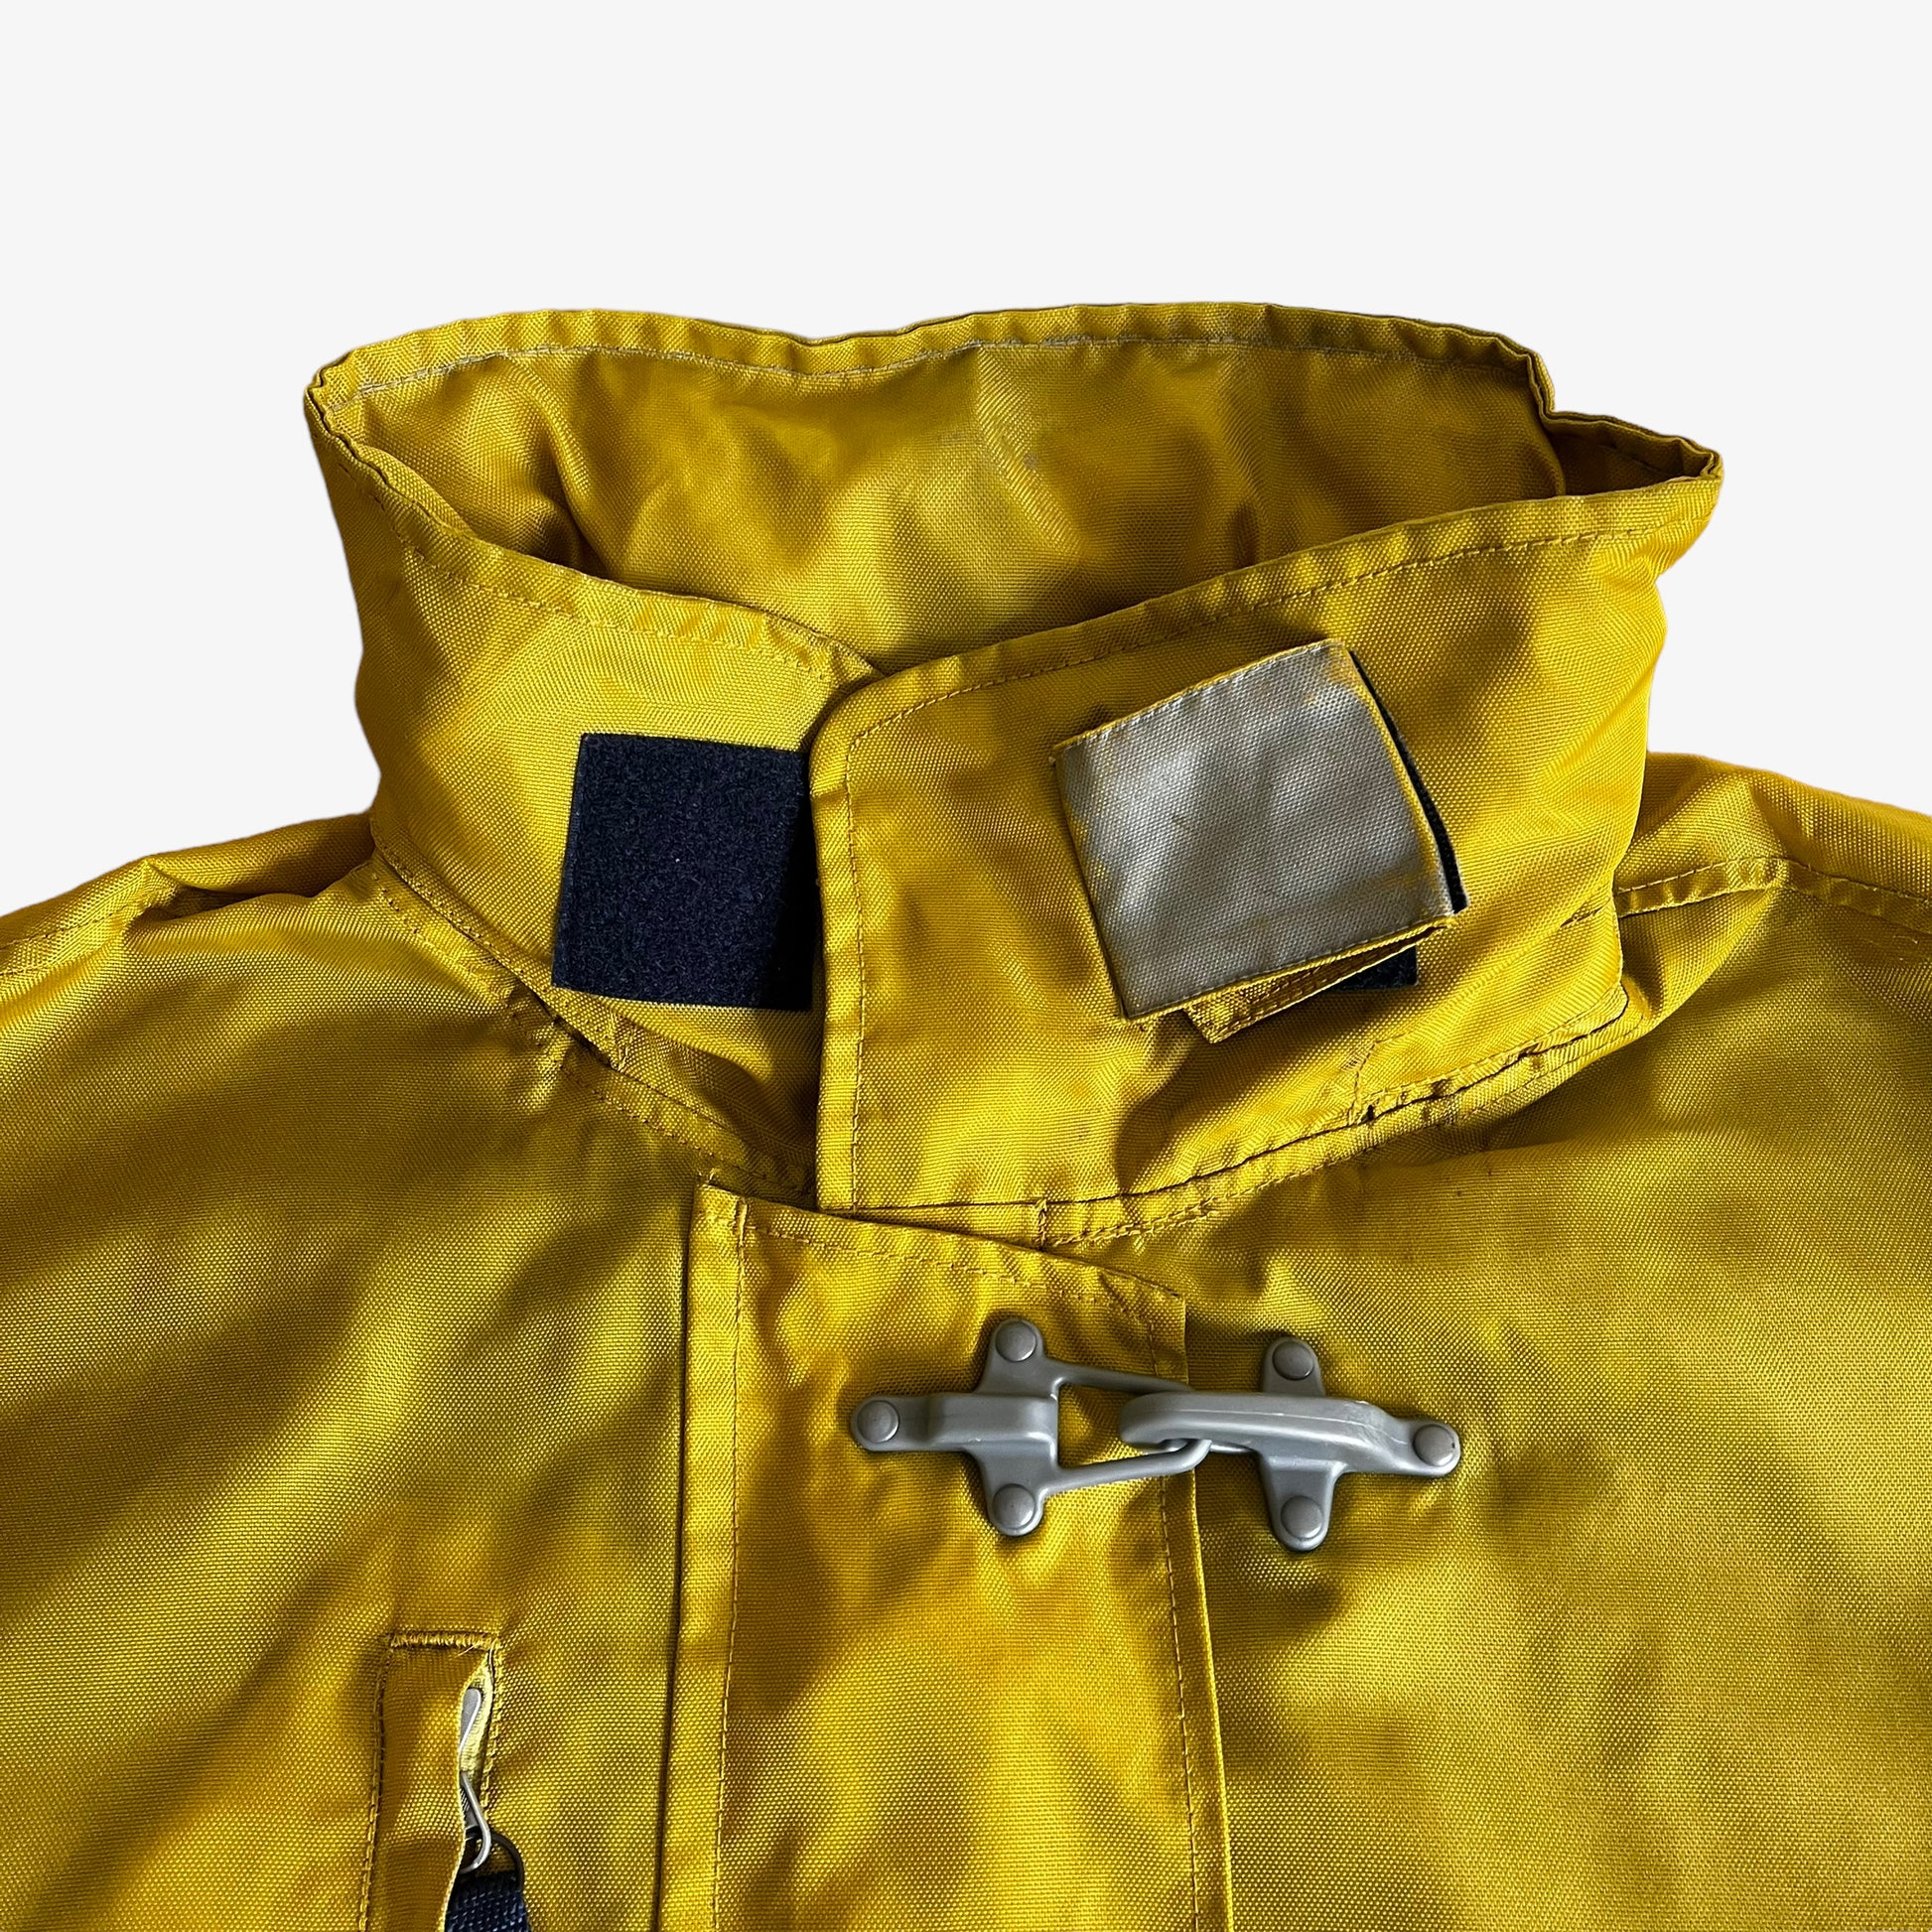 Vintage 90s Tommy Hilfiger Yellow Sailing Gear Jacket With Hook Fasteners Collar - Casspios Dream